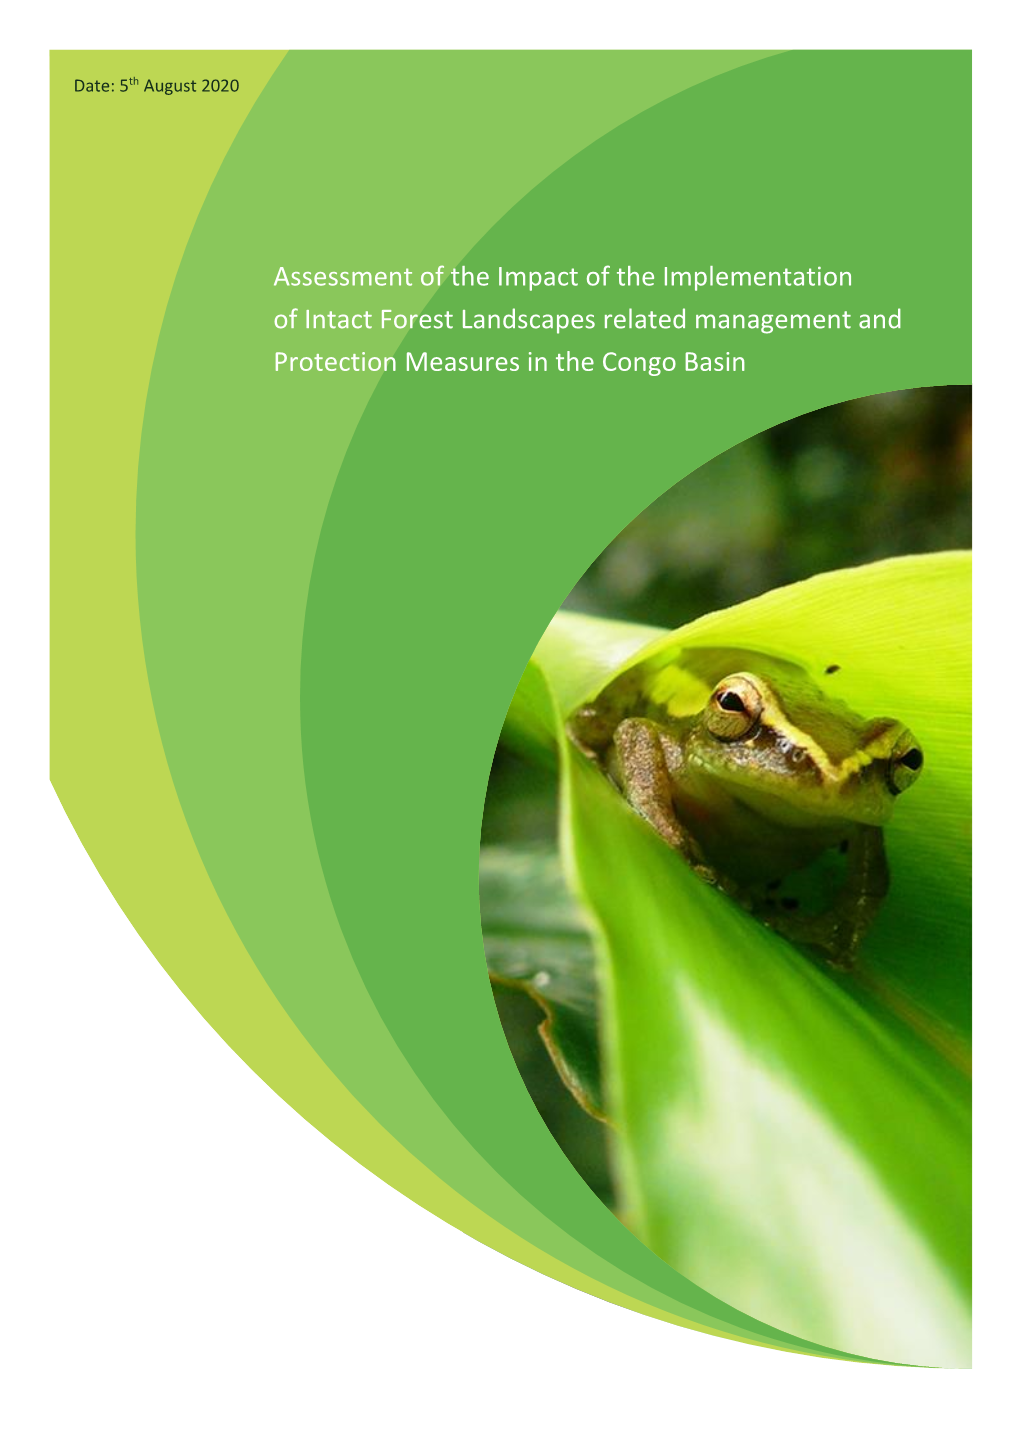 Assessment of the Impact of the Implementation of Intact Forest Landscapes Related Management and Protection Measures in the Congo Basin